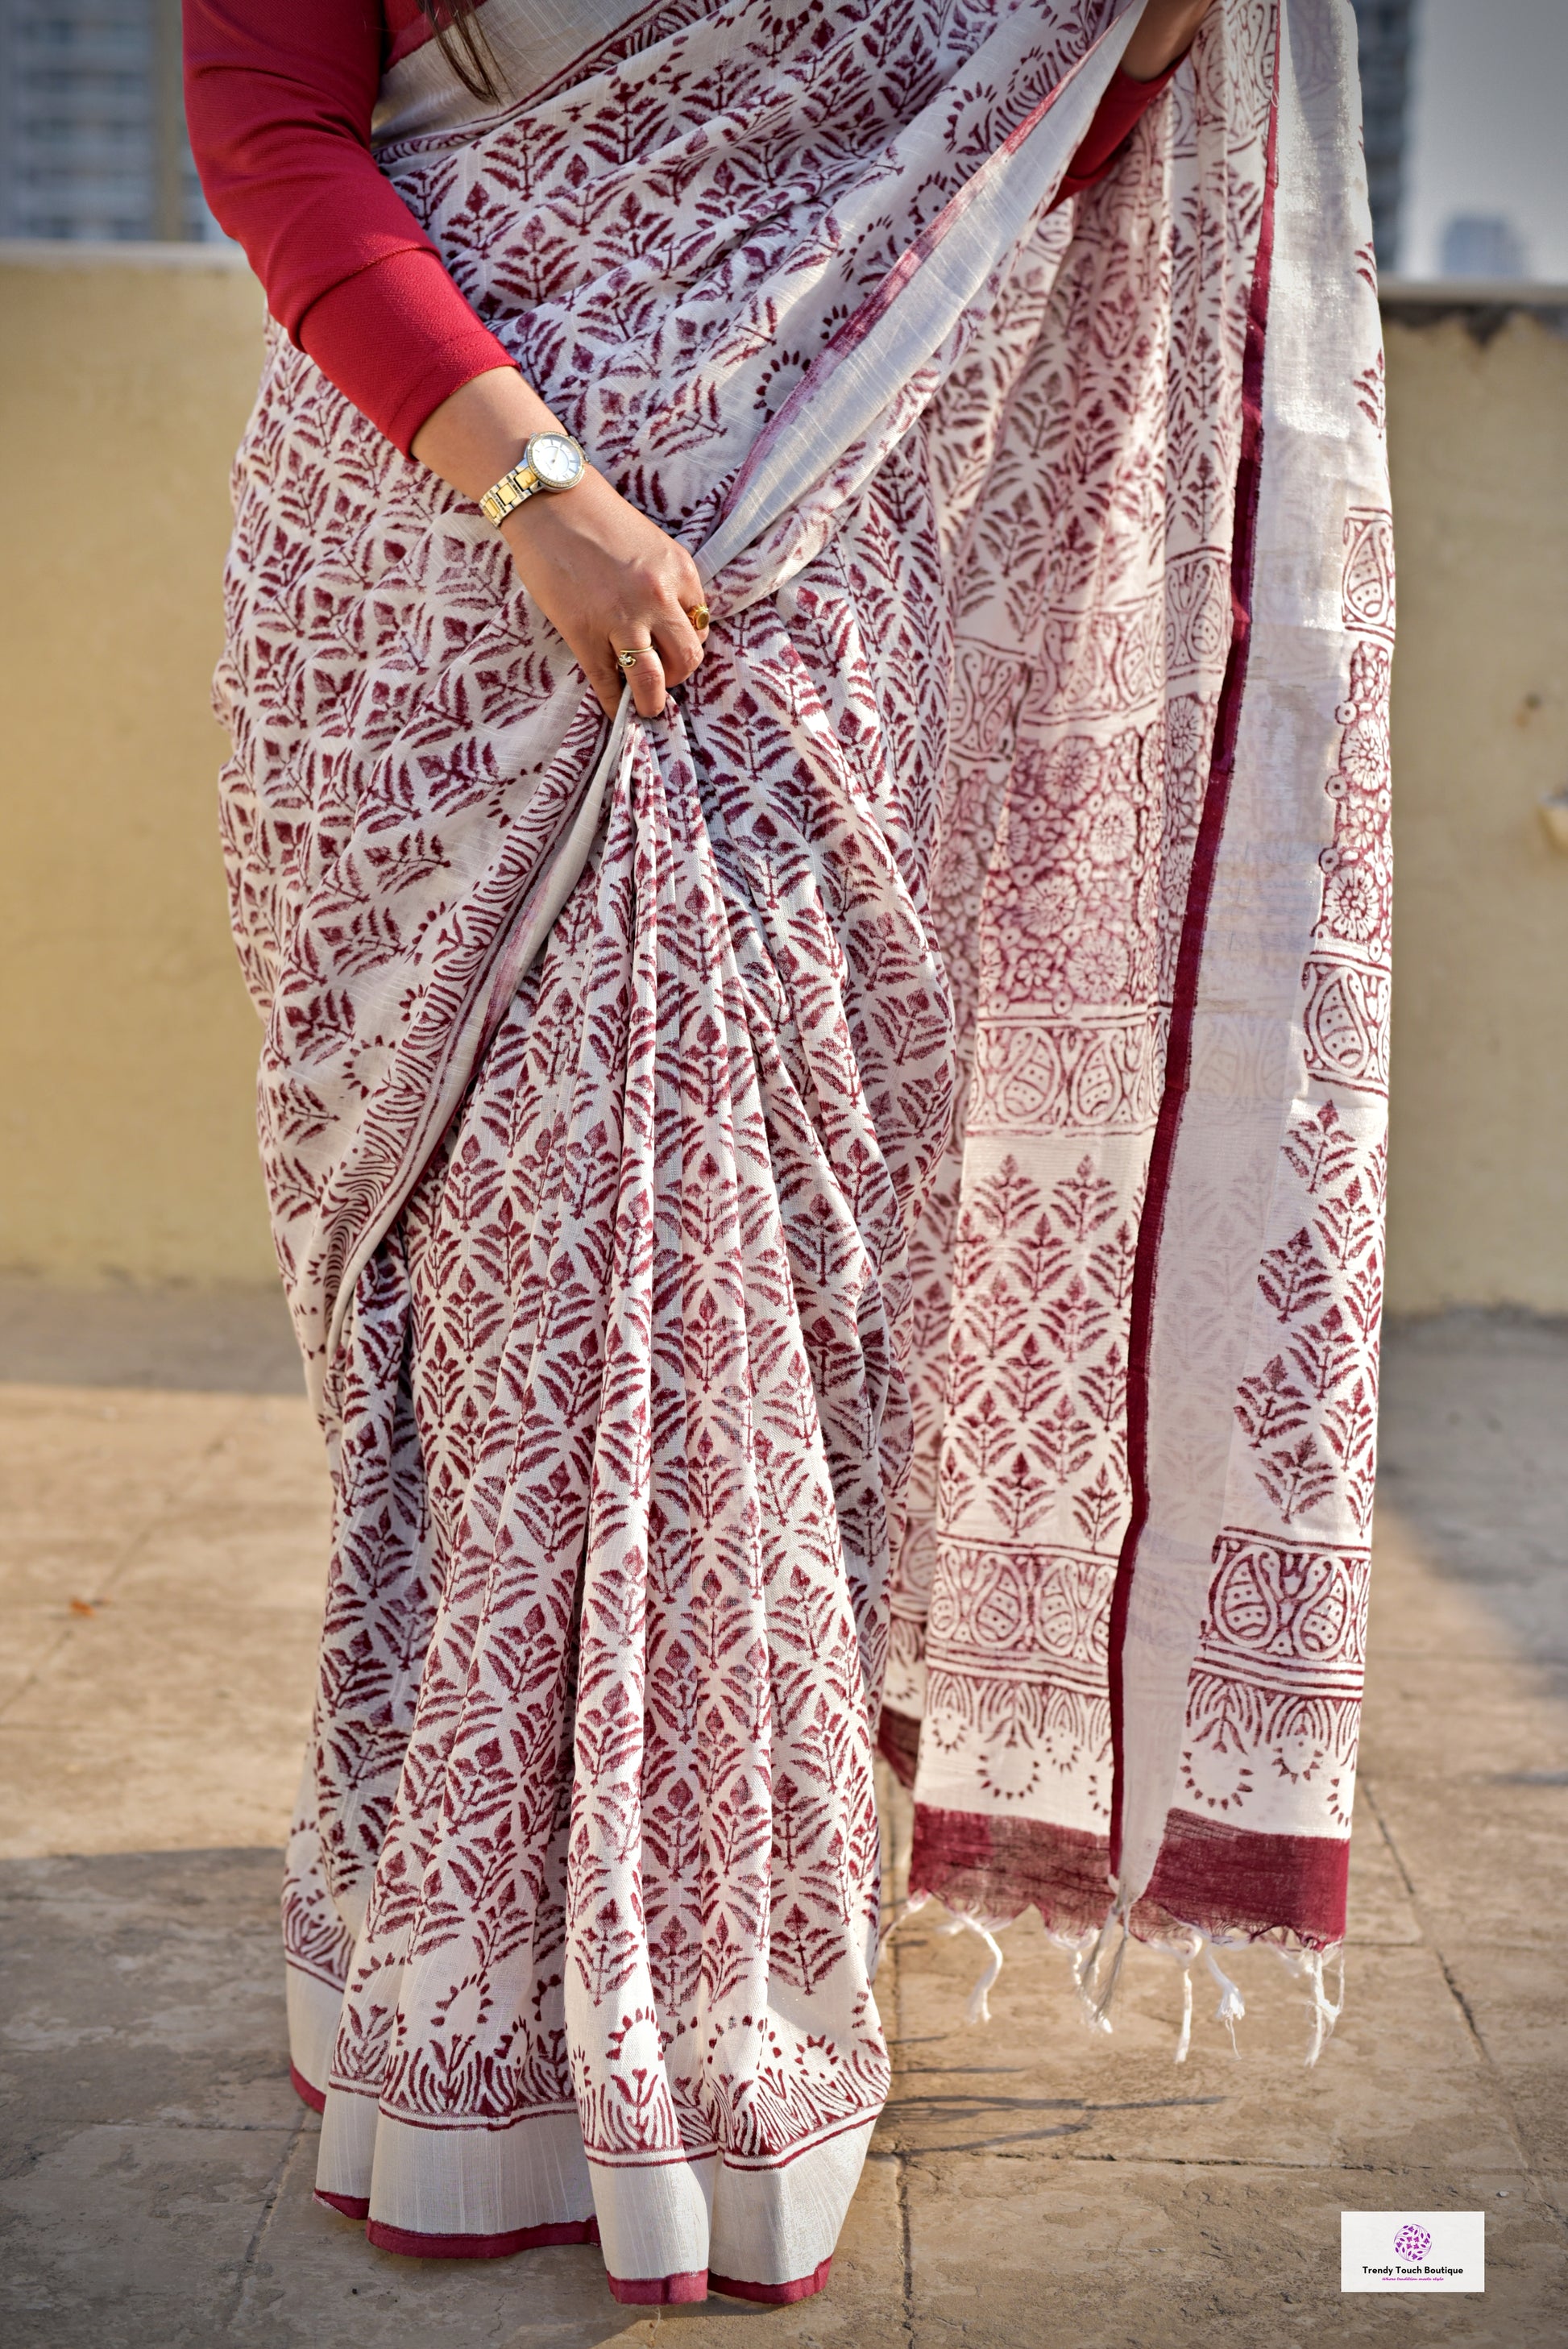 Maroon White Organic Linen Saree Handblock print in natural dye green soft best summer saree for office and casual outing best price with blouse piece